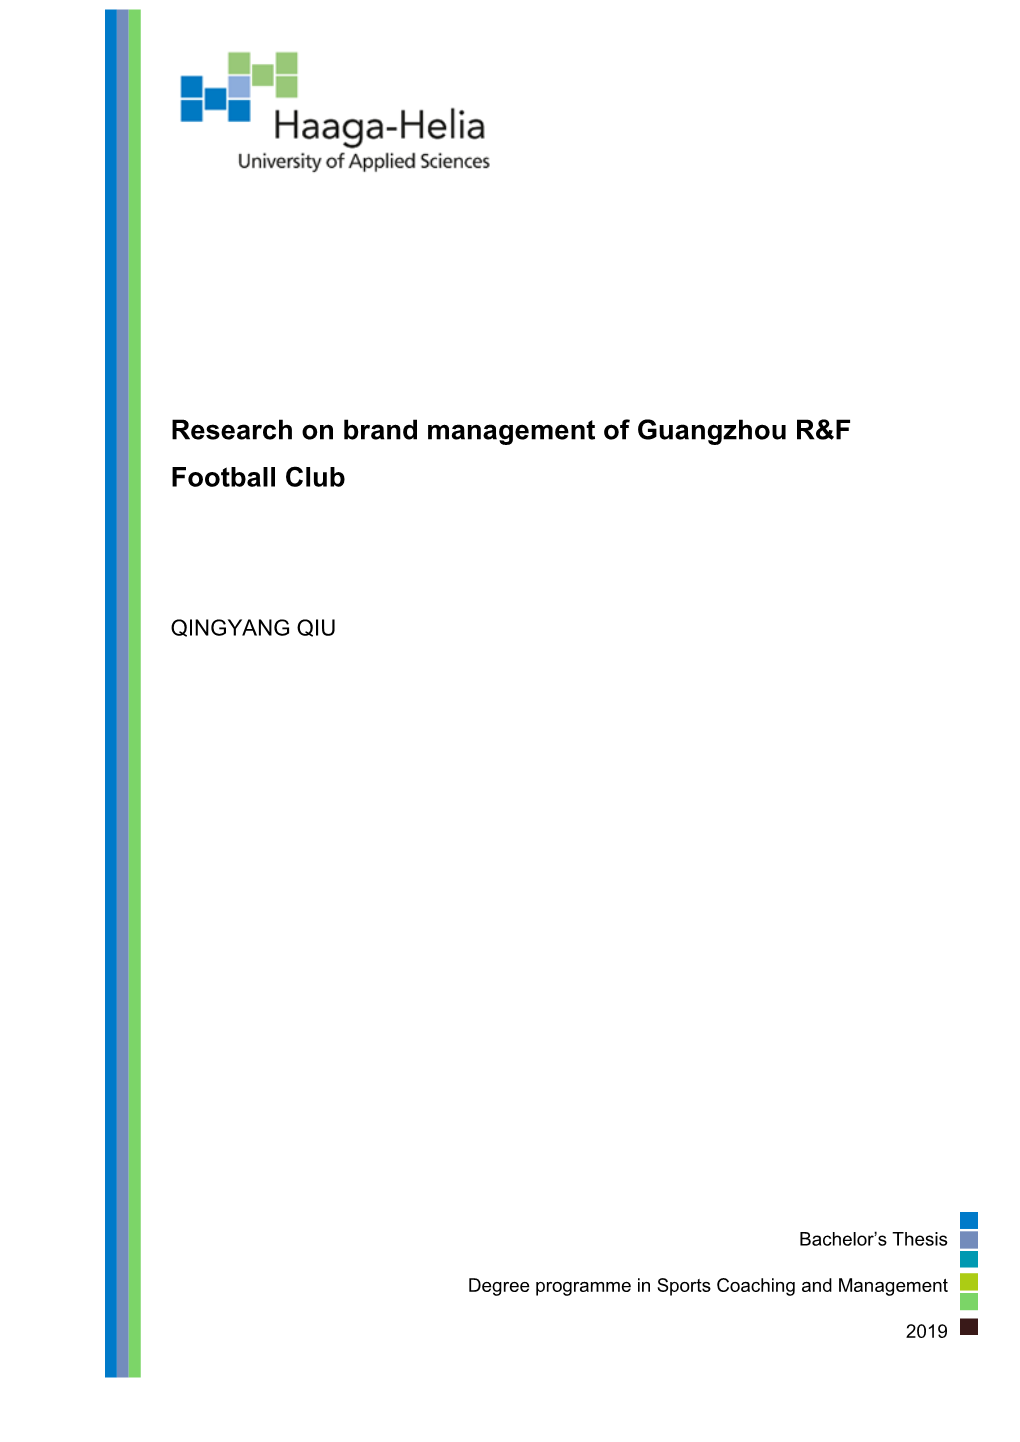 Research on Brand Management of Guangzhou R&F Football Club